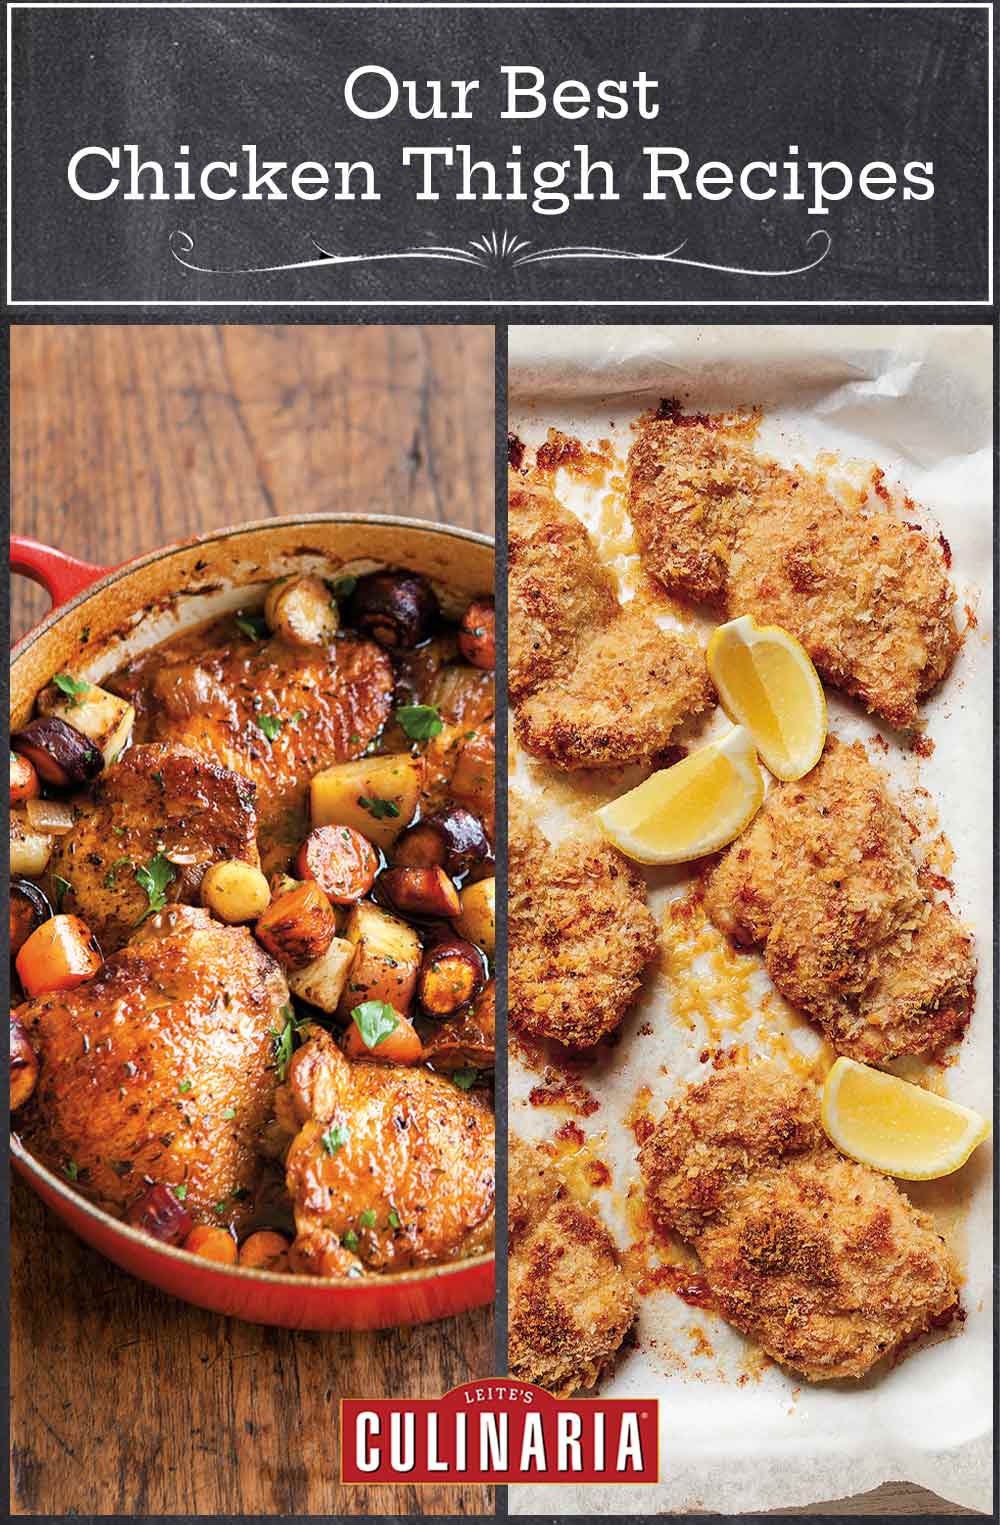 Images of 2 of the 29 chicken thigh recipes -- beer braised chicken thighs and oven fried chicken thighs.